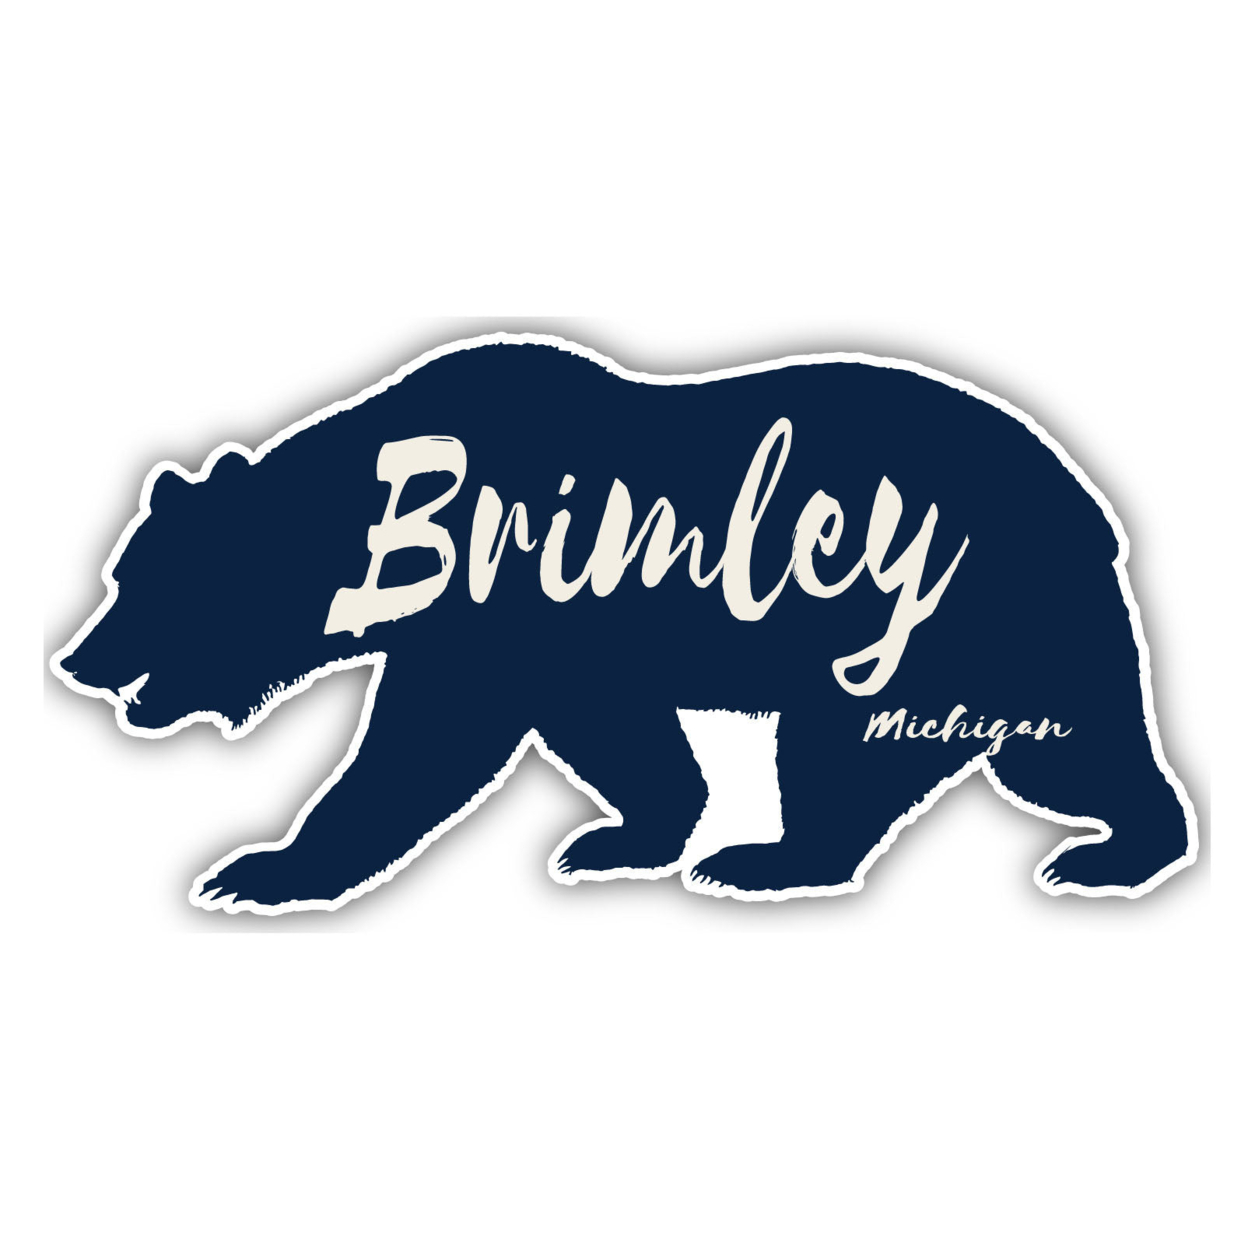 Brimley Michigan Souvenir Decorative Stickers (Choose Theme And Size) - 4-Pack, 6-Inch, Great Outdoors